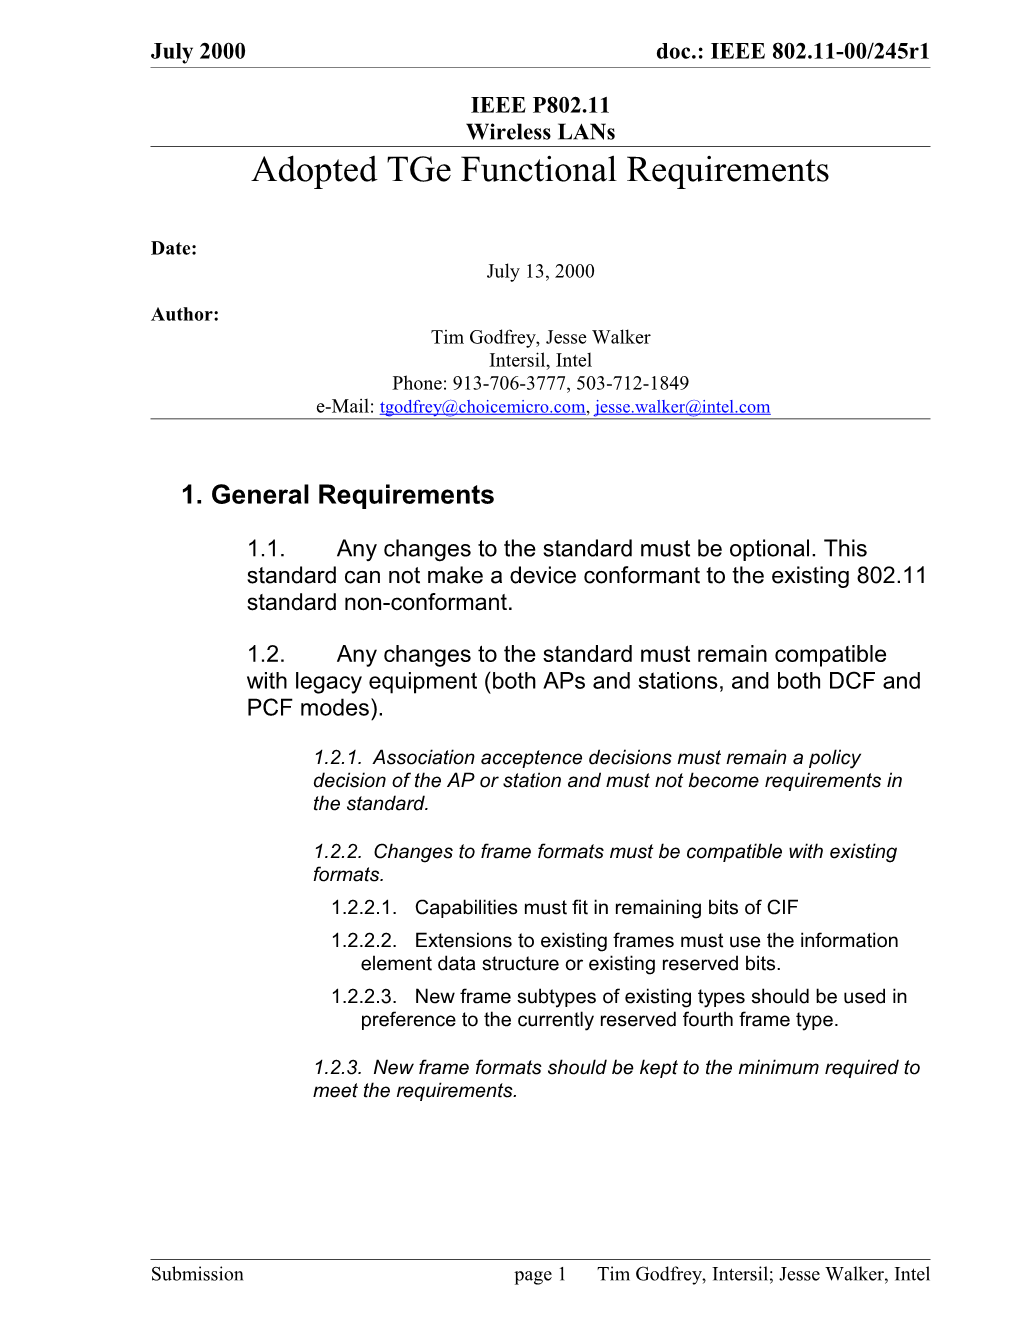 Adopted Tge Functional Requirements